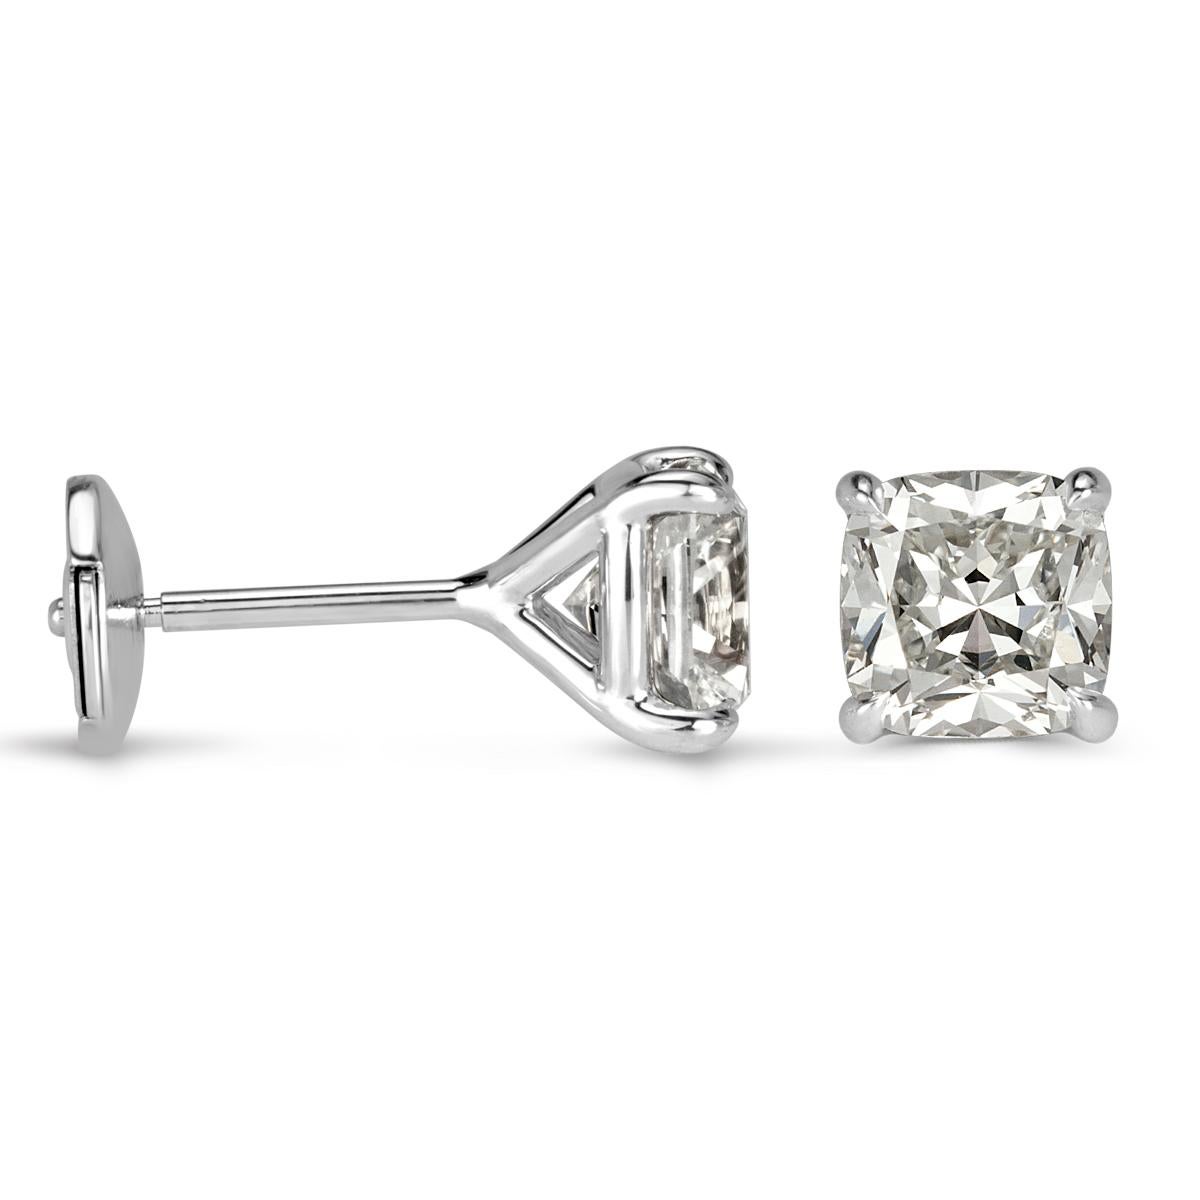 This truly ravishing pair of diamond stud earrings showcases two exquisite old Mine cut diamonds with a total weight of 2.04ct. They are each GIA certified at I, VVS1 and I-VS1 and set in a classic four-prong, 18k white gold setting.
